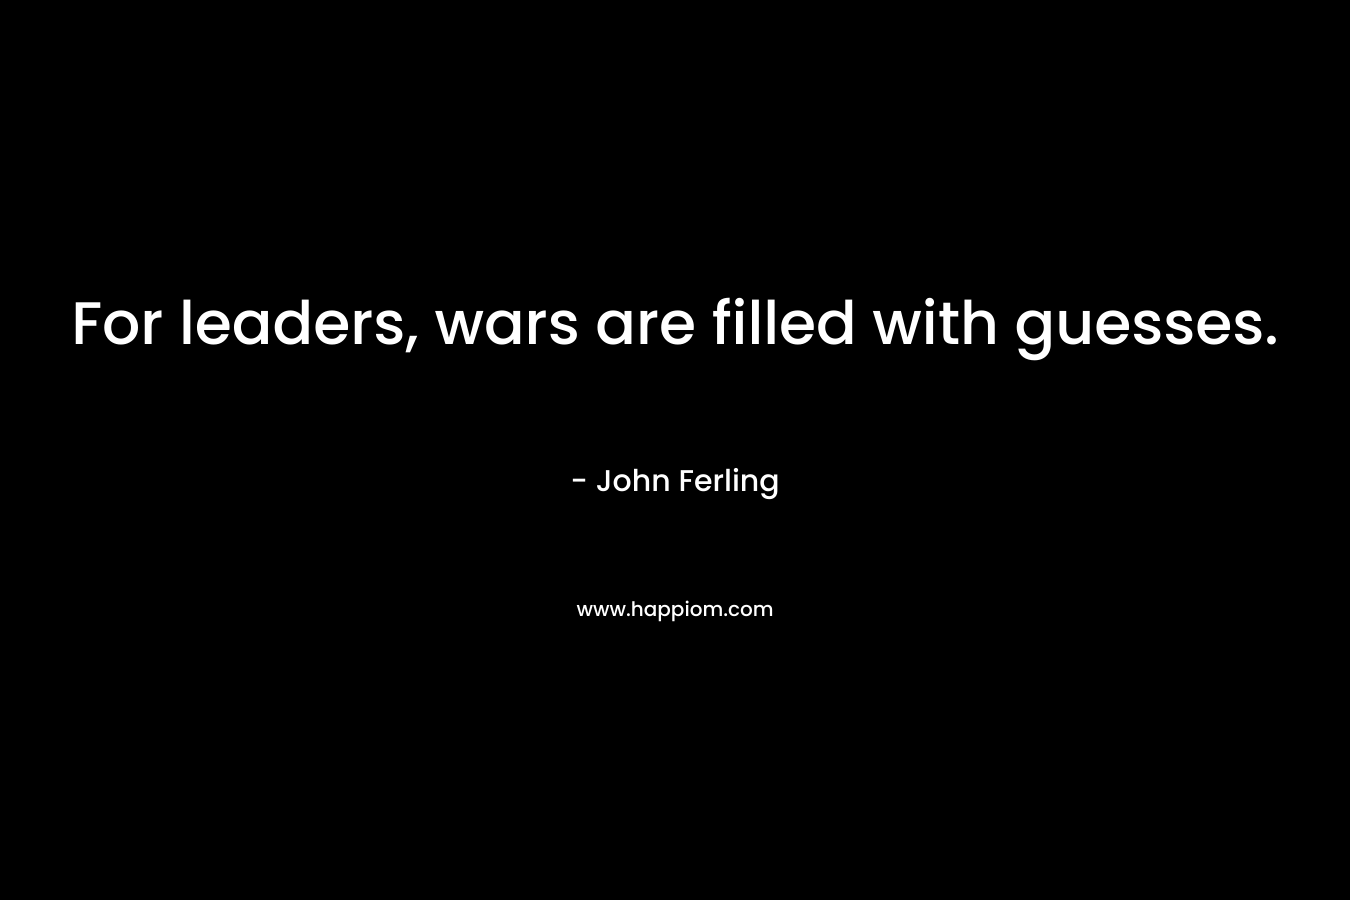 For leaders, wars are filled with guesses. – John Ferling